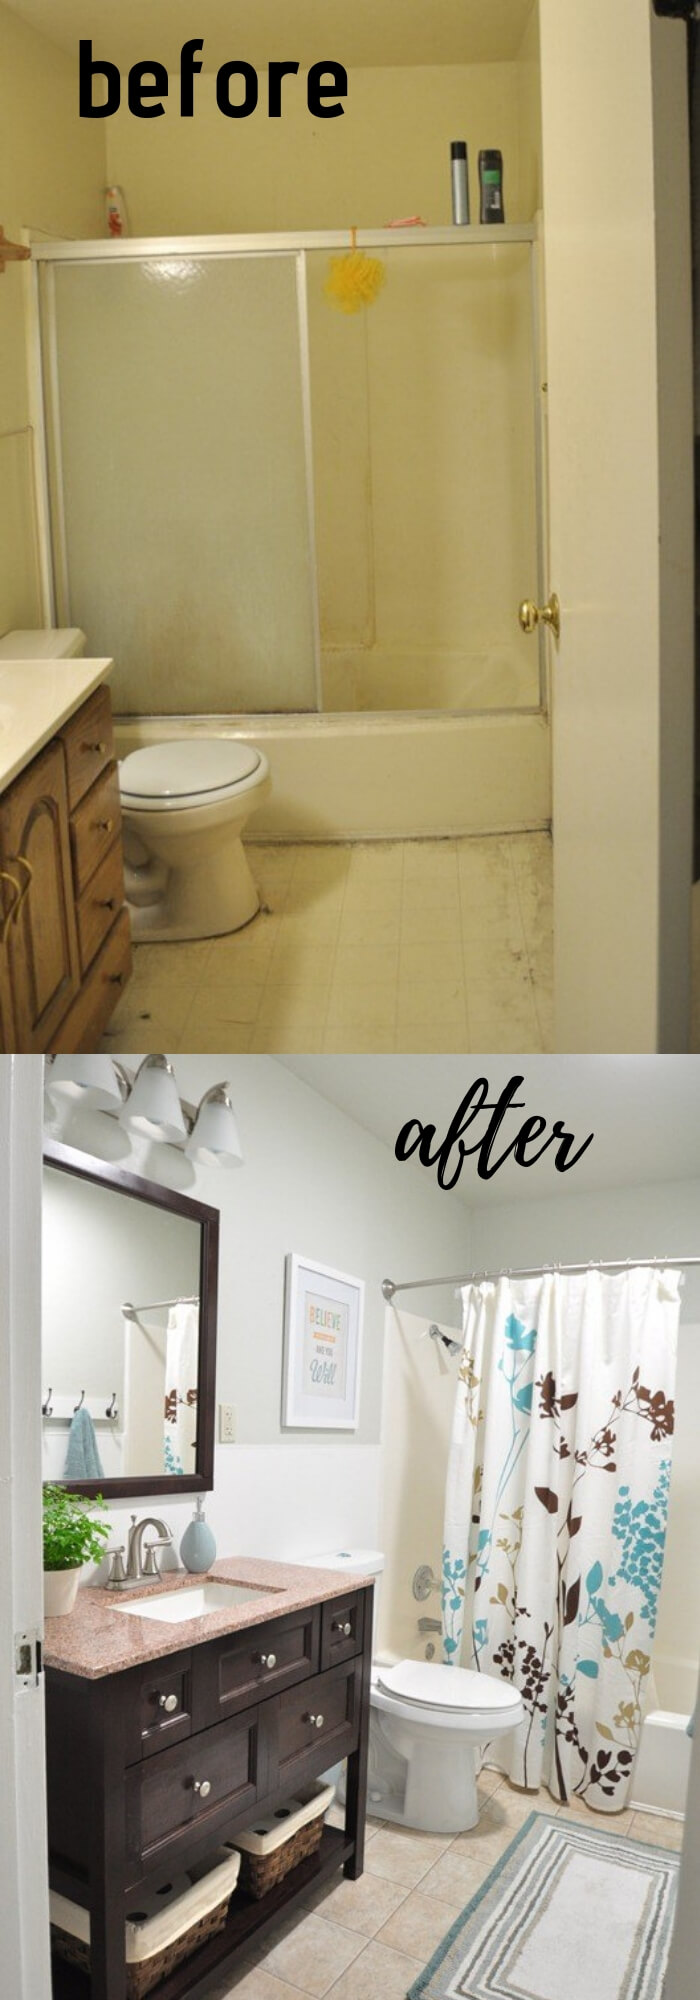 19 before and after bathroom makeovers